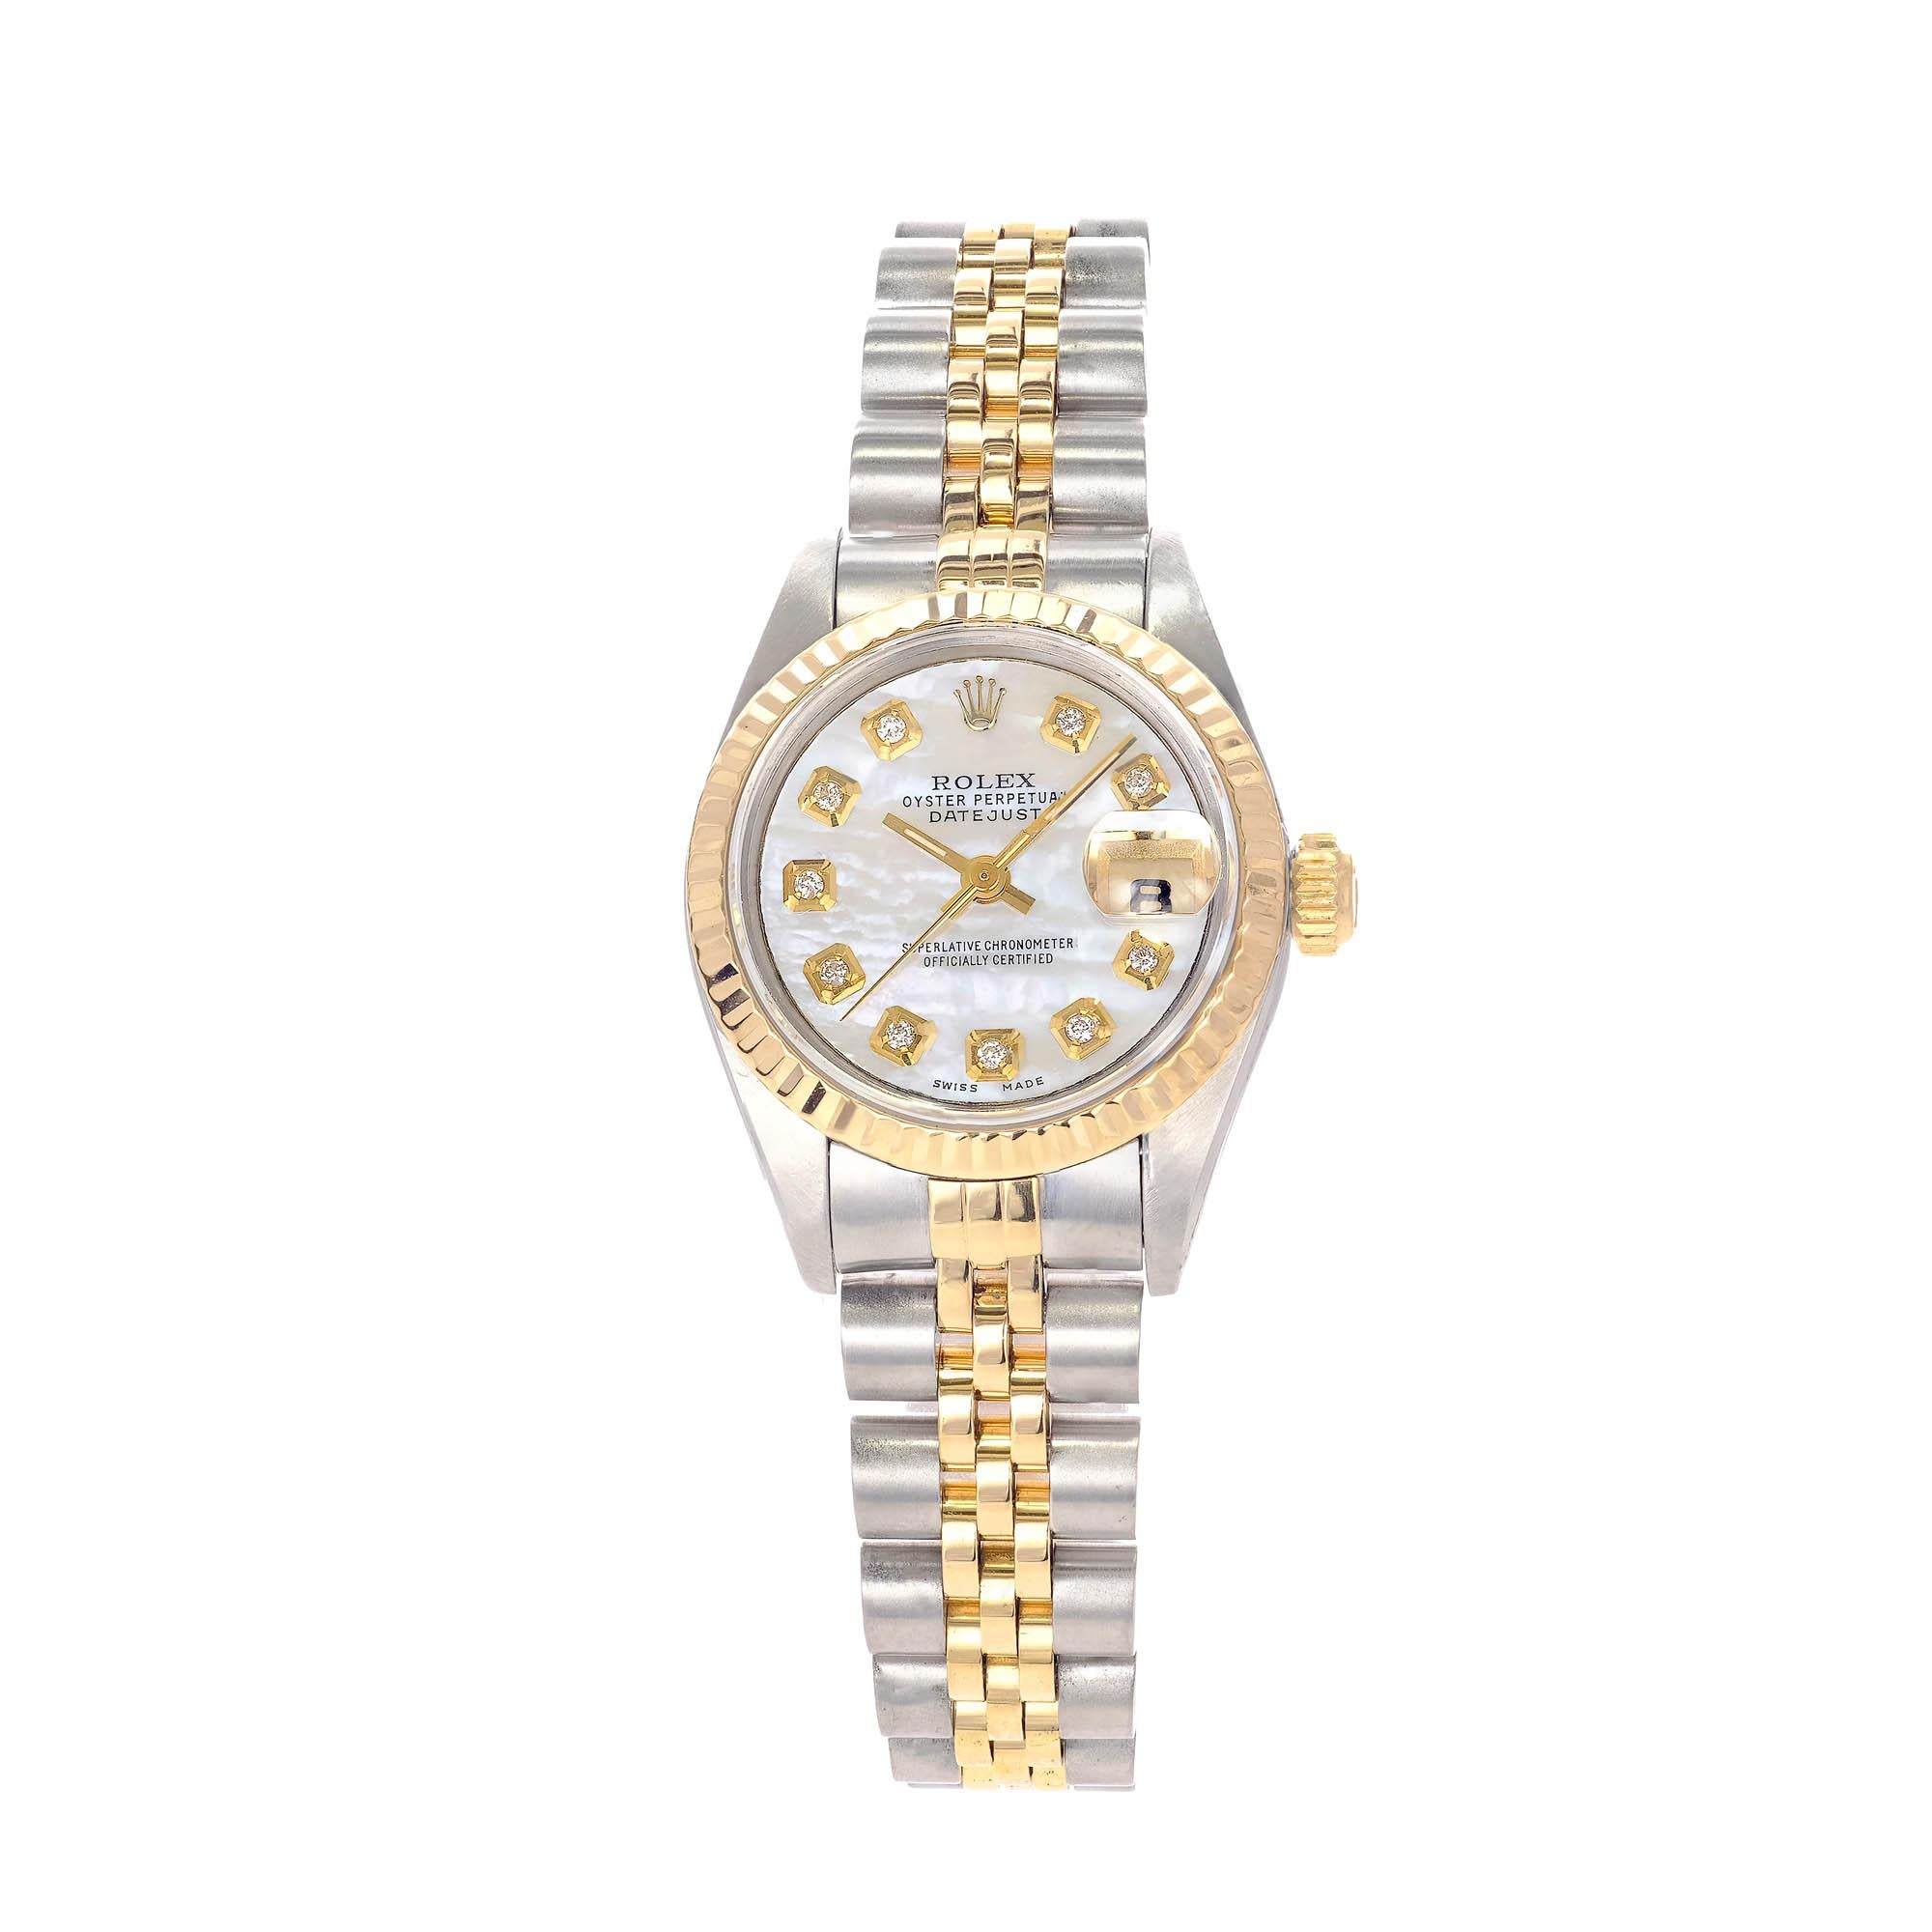 Rolex date just ladies 18k yellow gold and stainless-steel wristwatch with white mother of pearl and diamond dial and fluted bezel.

Length: 6 ½ - 7 Inches
Width: 26mm
Band Width Case: 12.5mm
Band: 18k yellow gold Stainless Steel jubilee
Crystal: